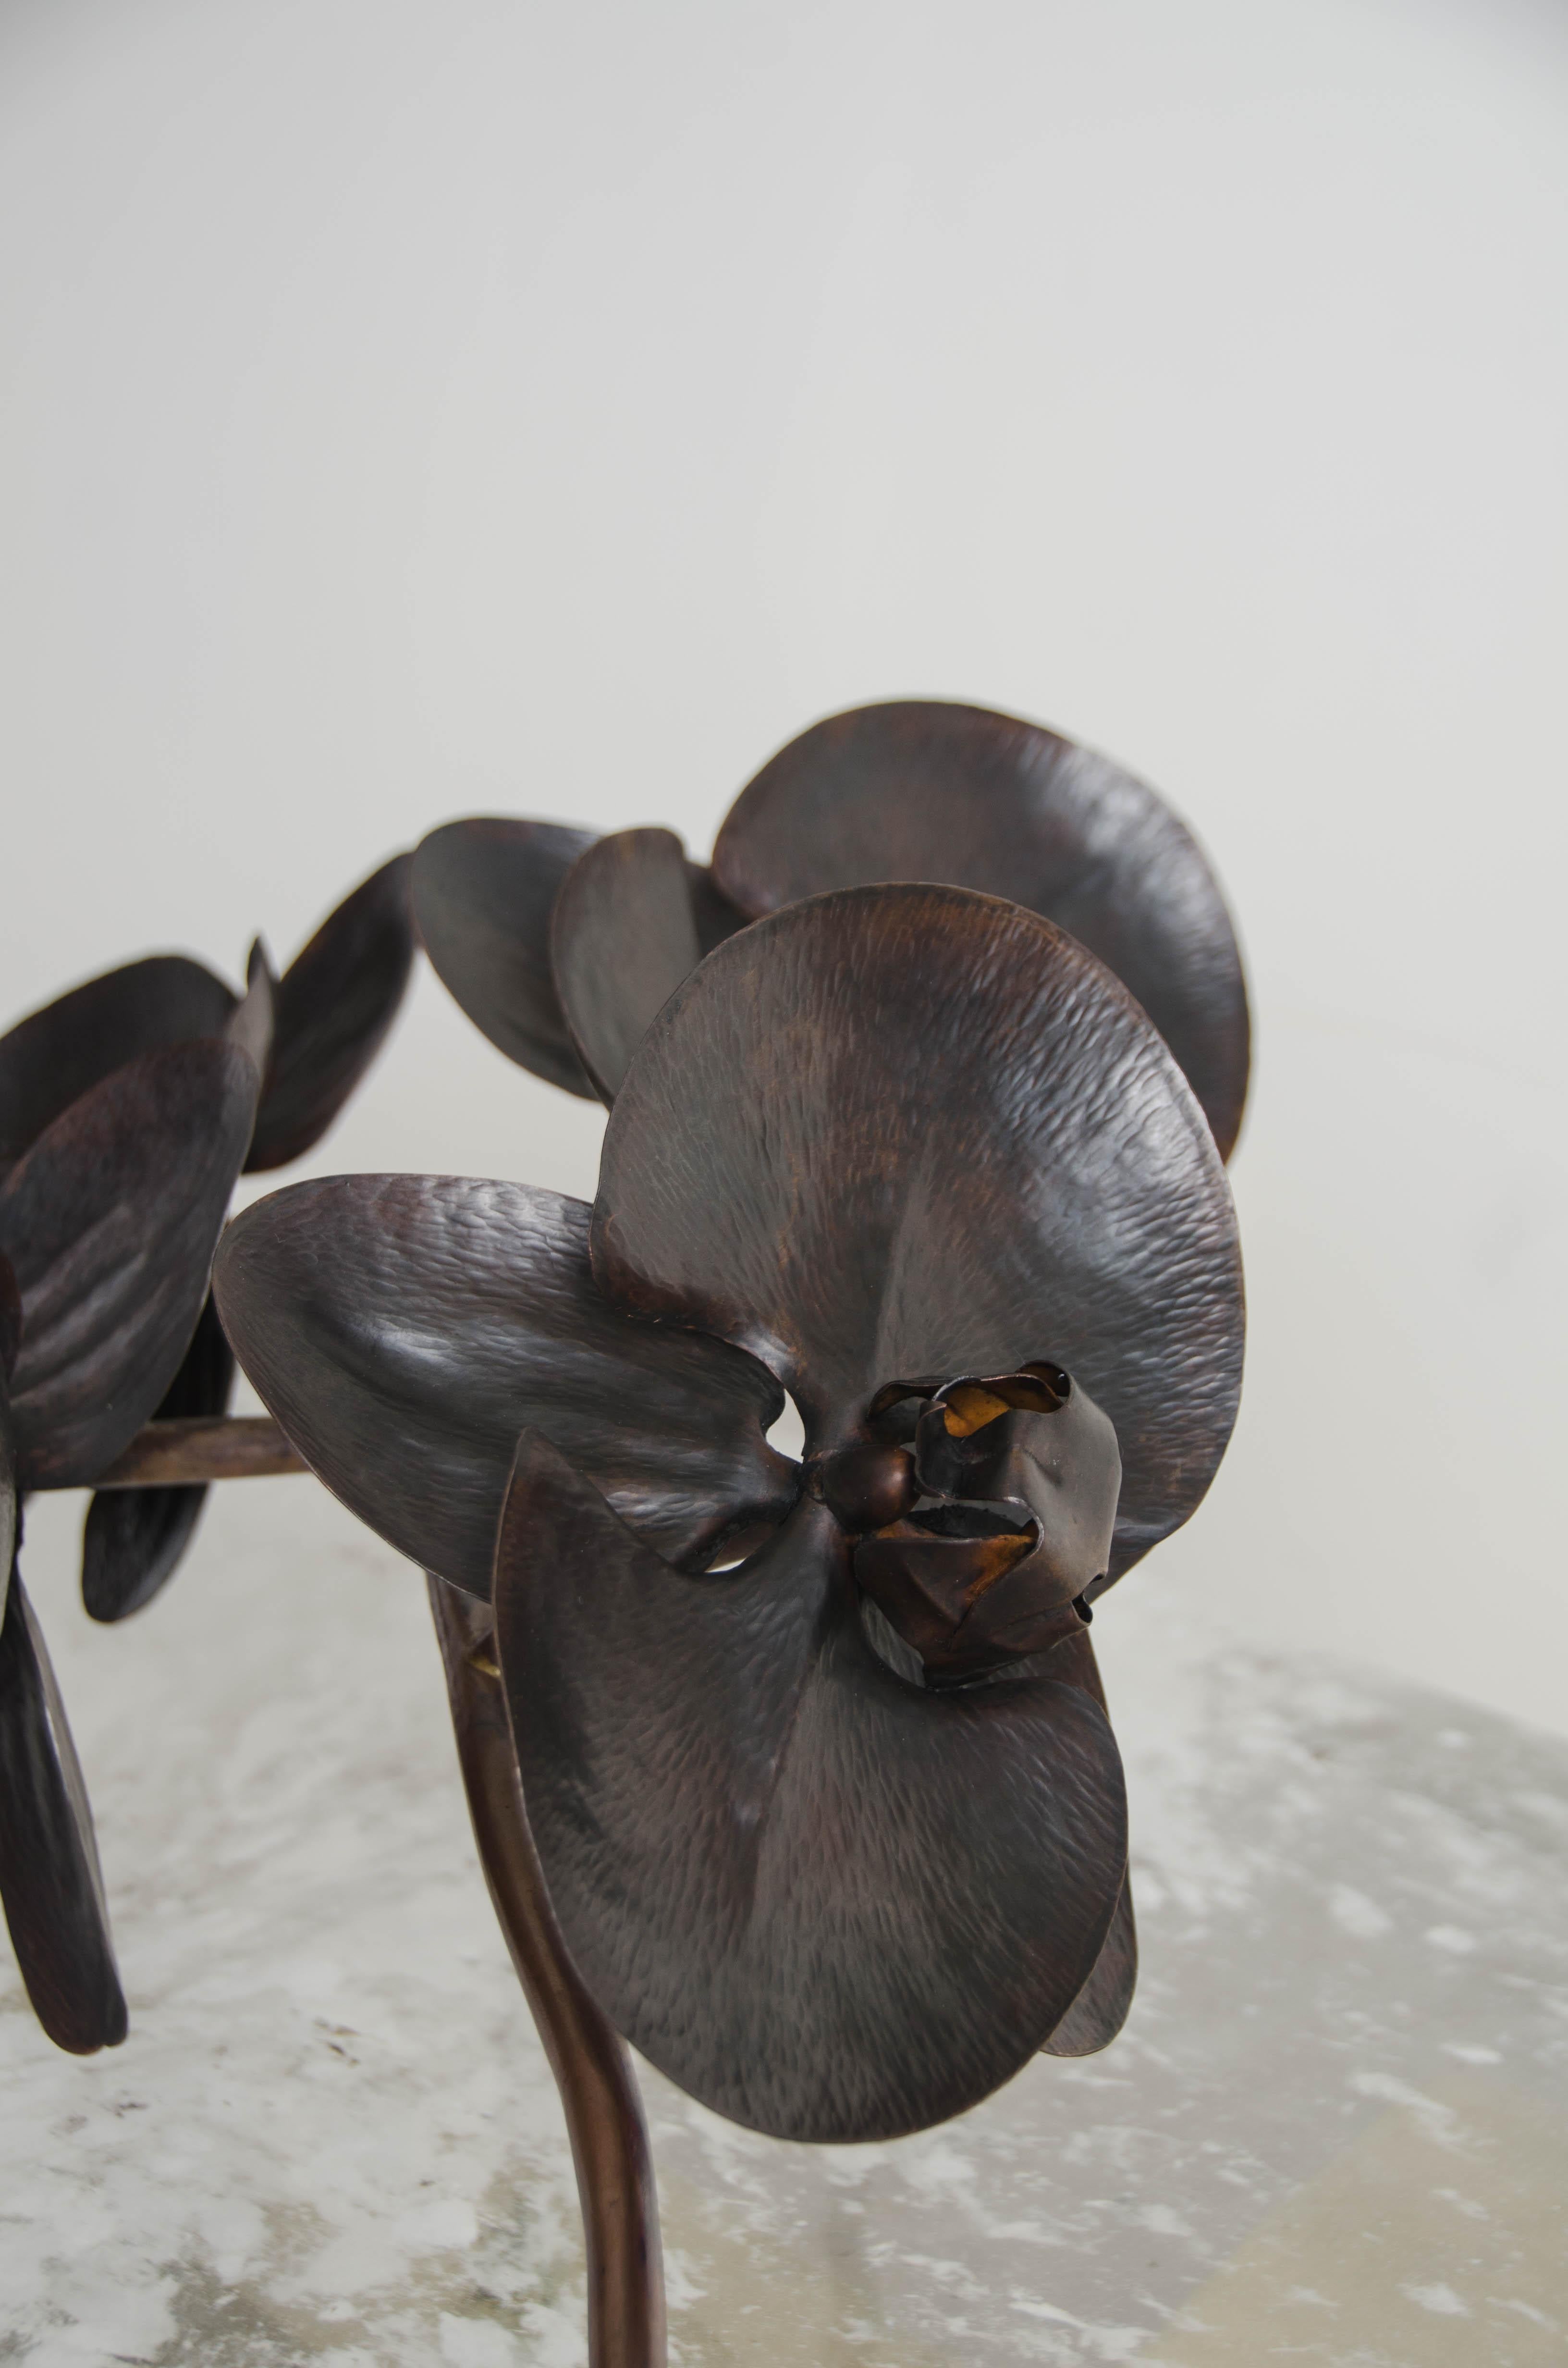 Repoussé Large Orchid Sculpture by Robert Kuo, Hand Repoussé Copper, Limited Edition